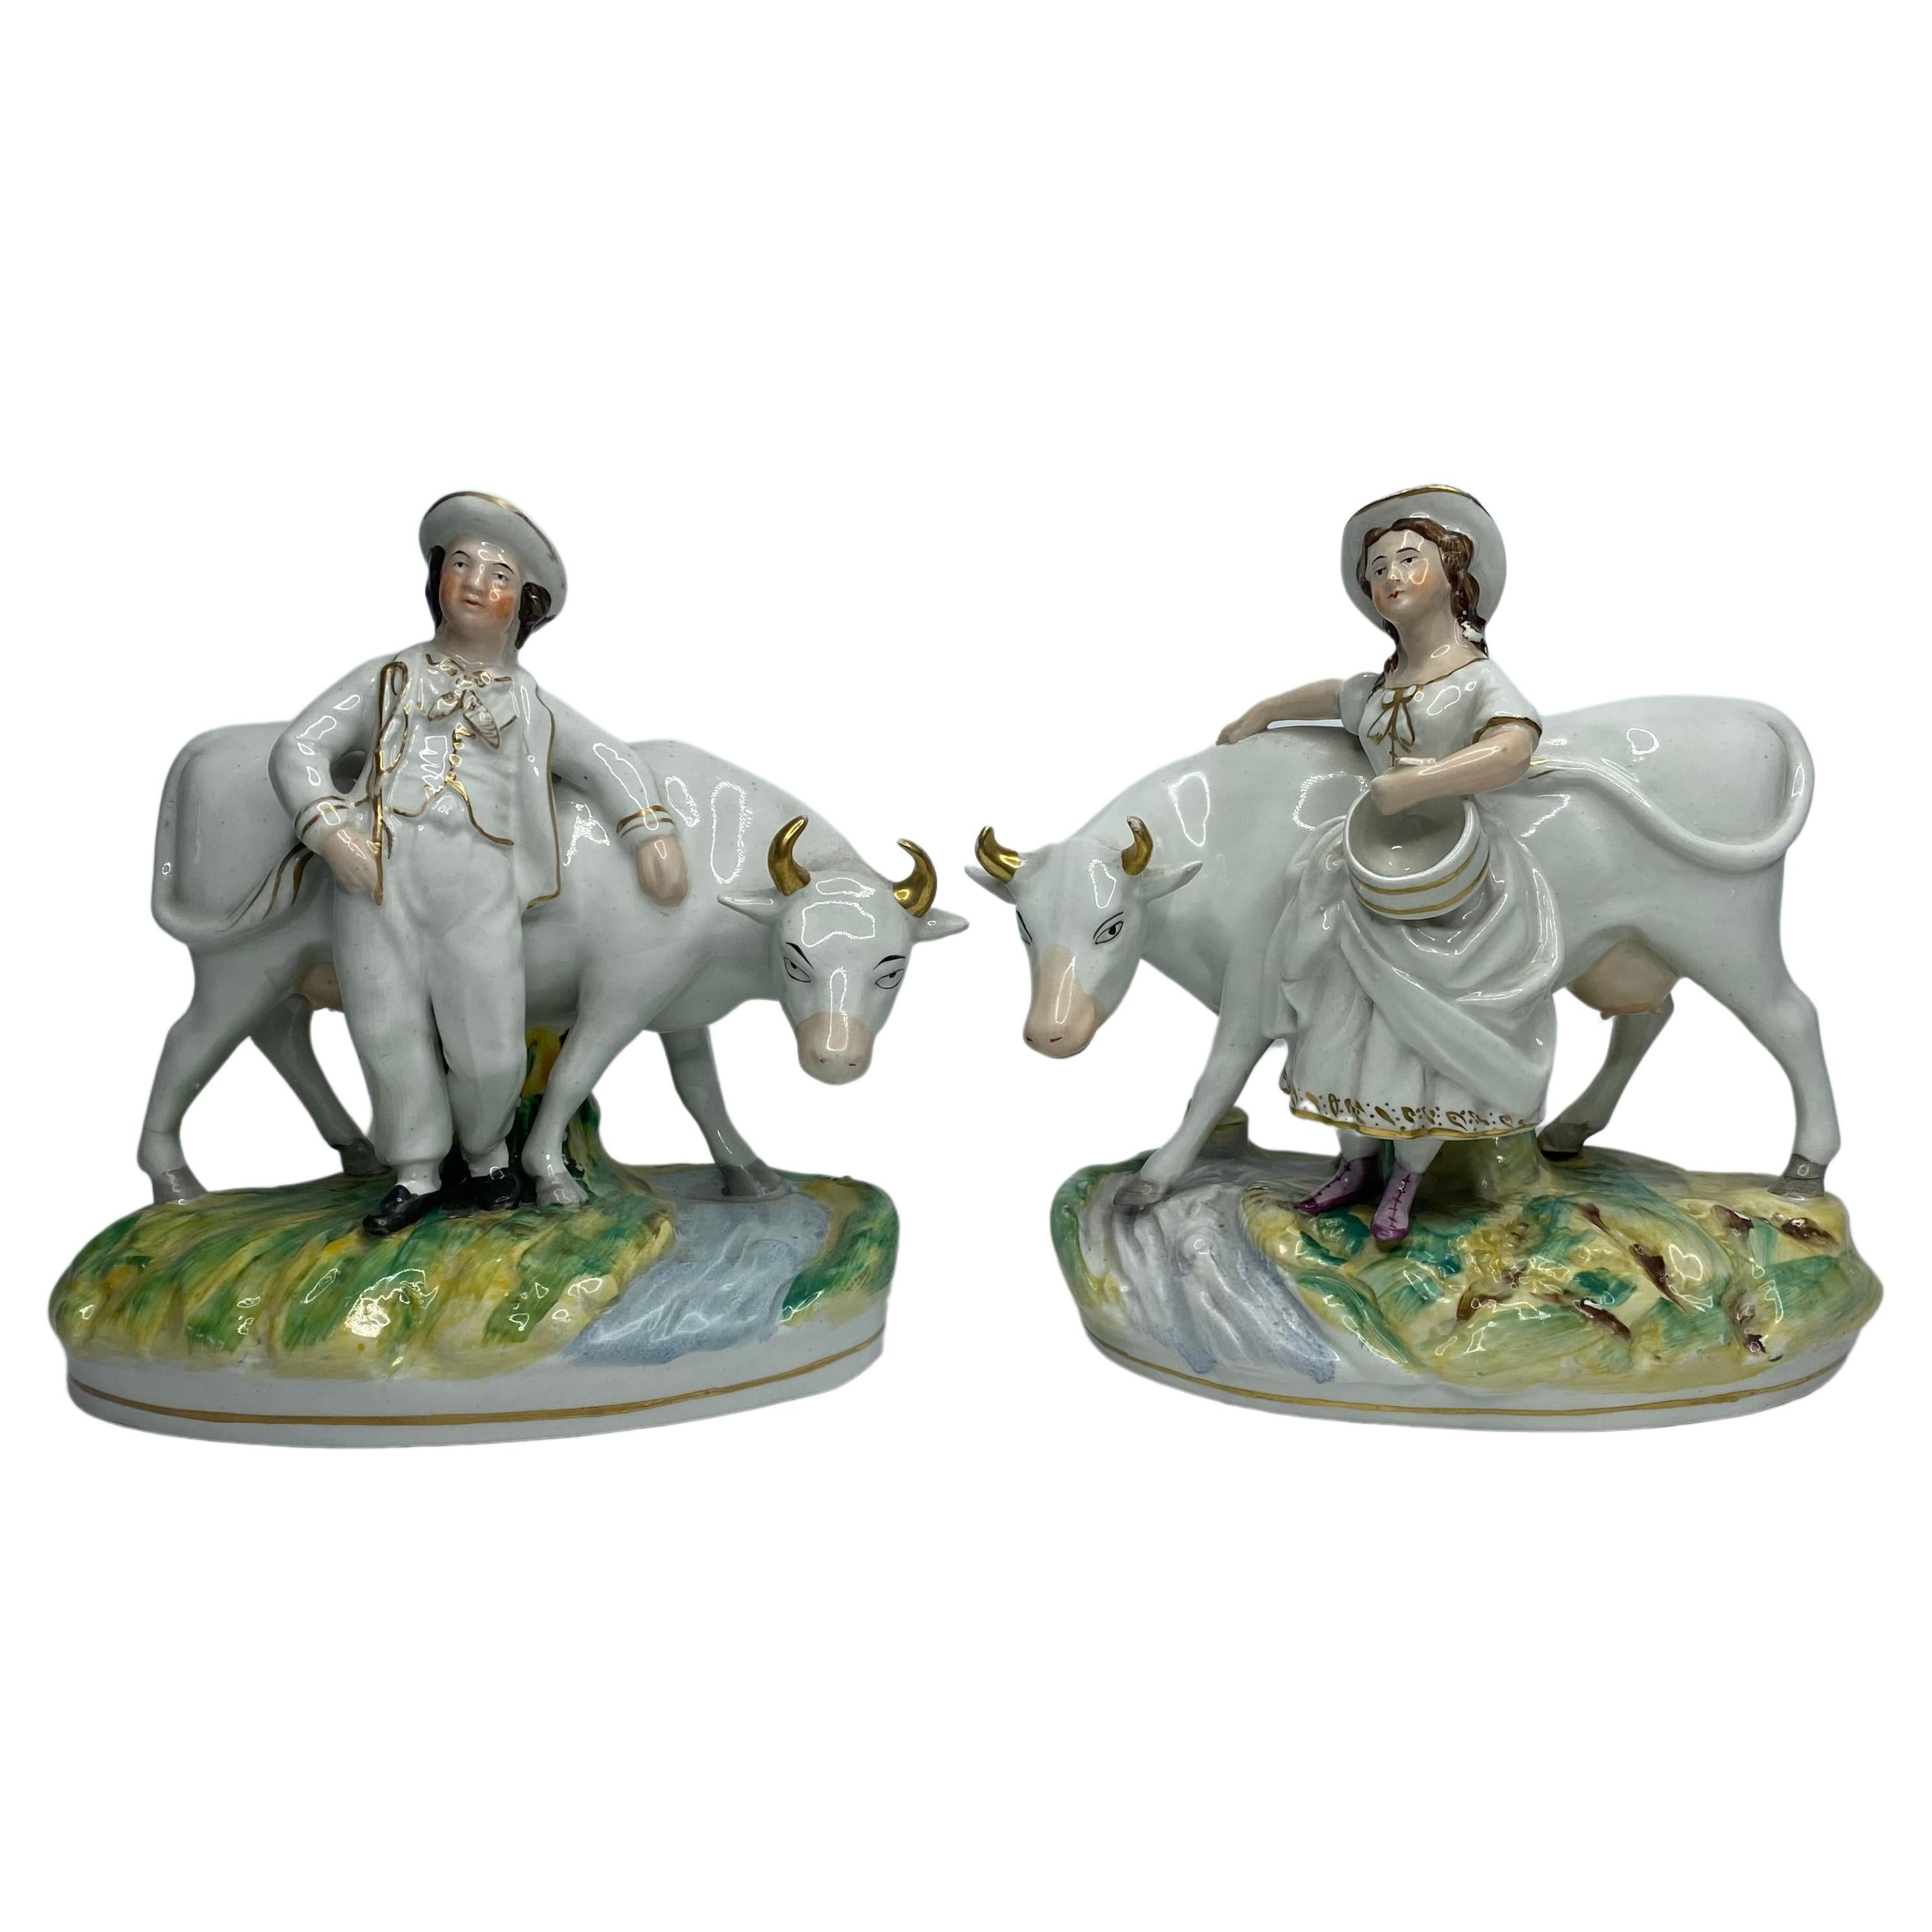 Pair Staffordshire pottery cow groups, Thomas Parr, c. 1860.